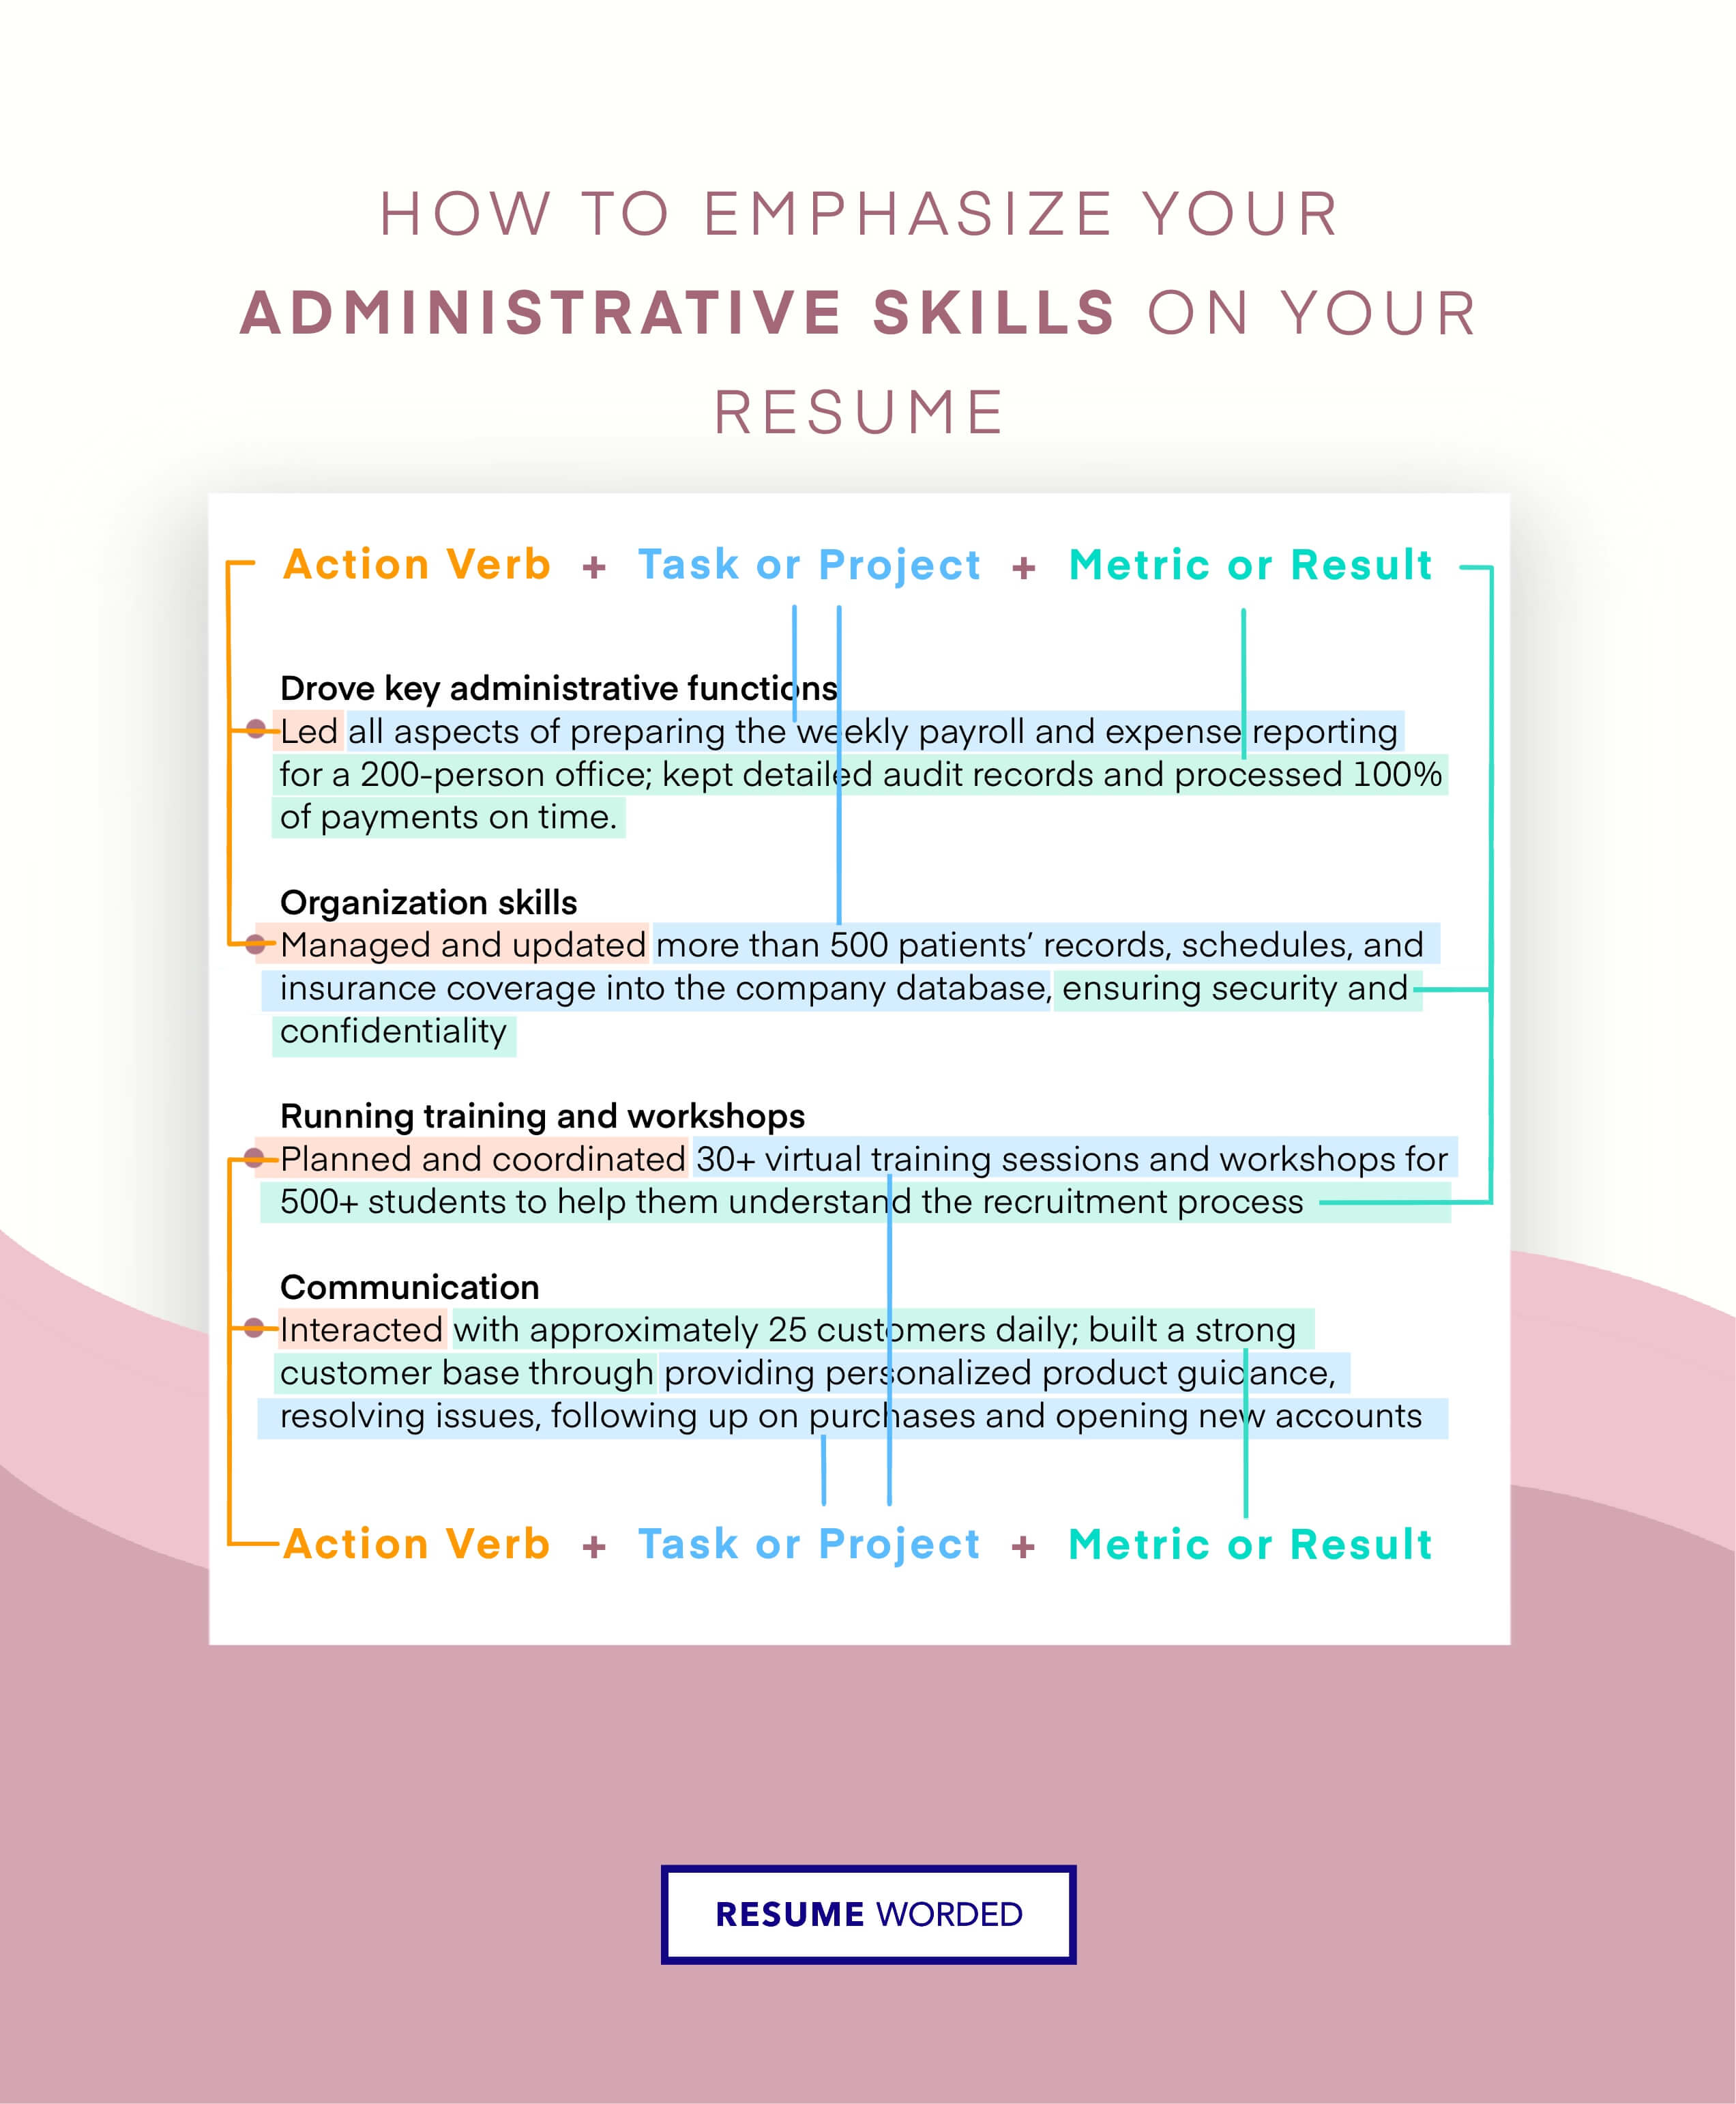 Highlights training and leadership experience, which are transferrable skills key to administrative assistant roles - Senior Administrative Assistant Resume